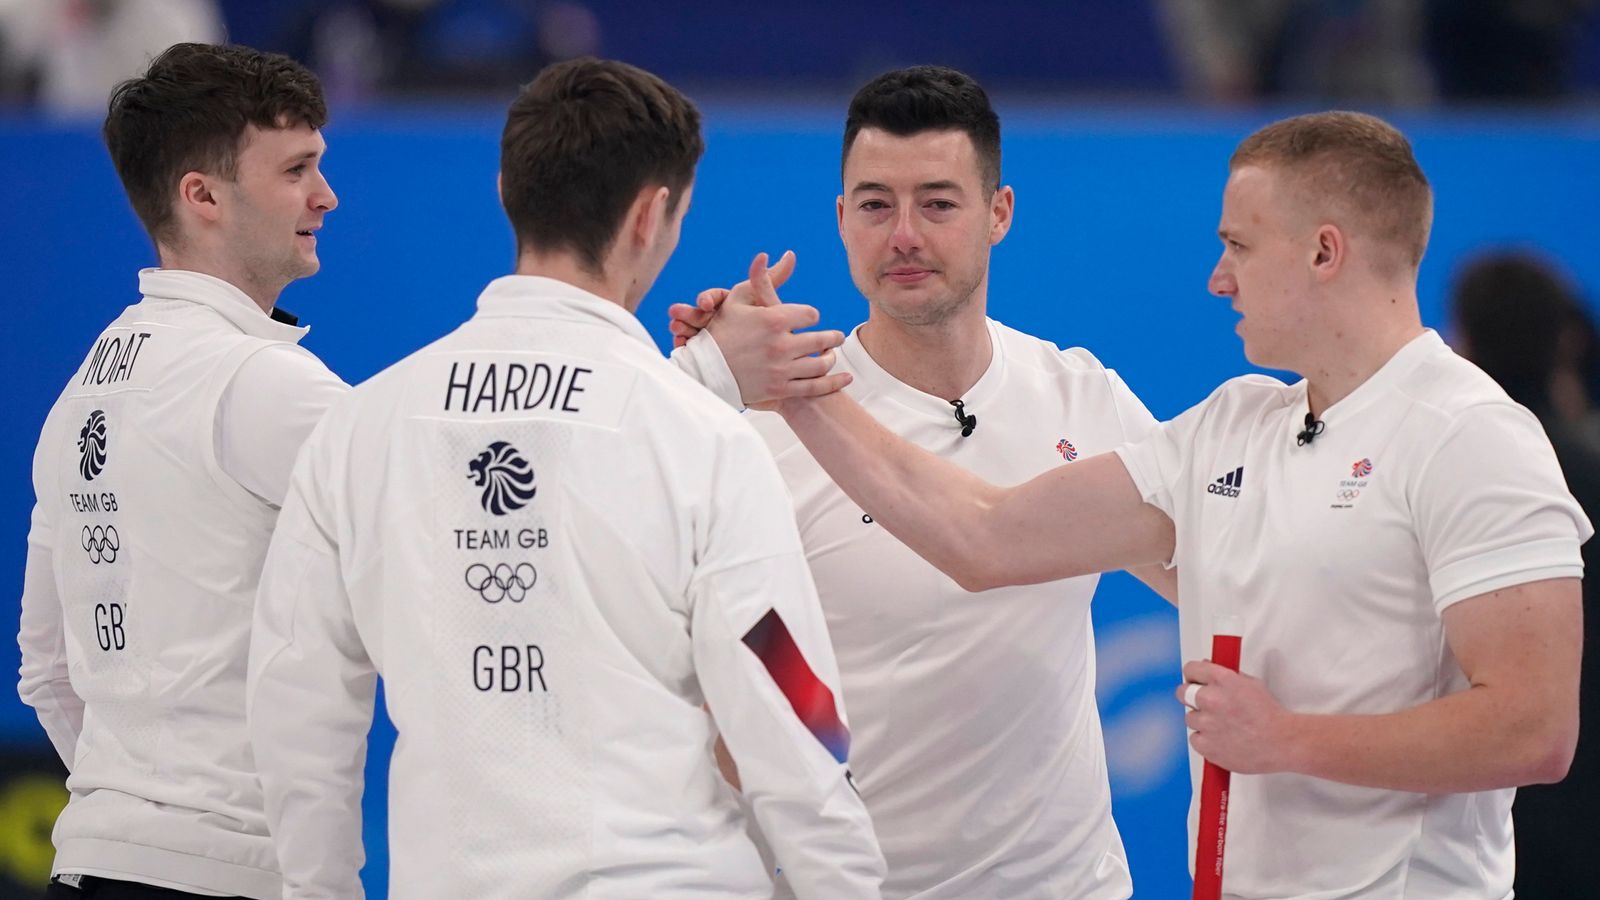 Winter Olympics: Team GB beaten 5-4 by Sweden in dramatic men’s curling gold medal match